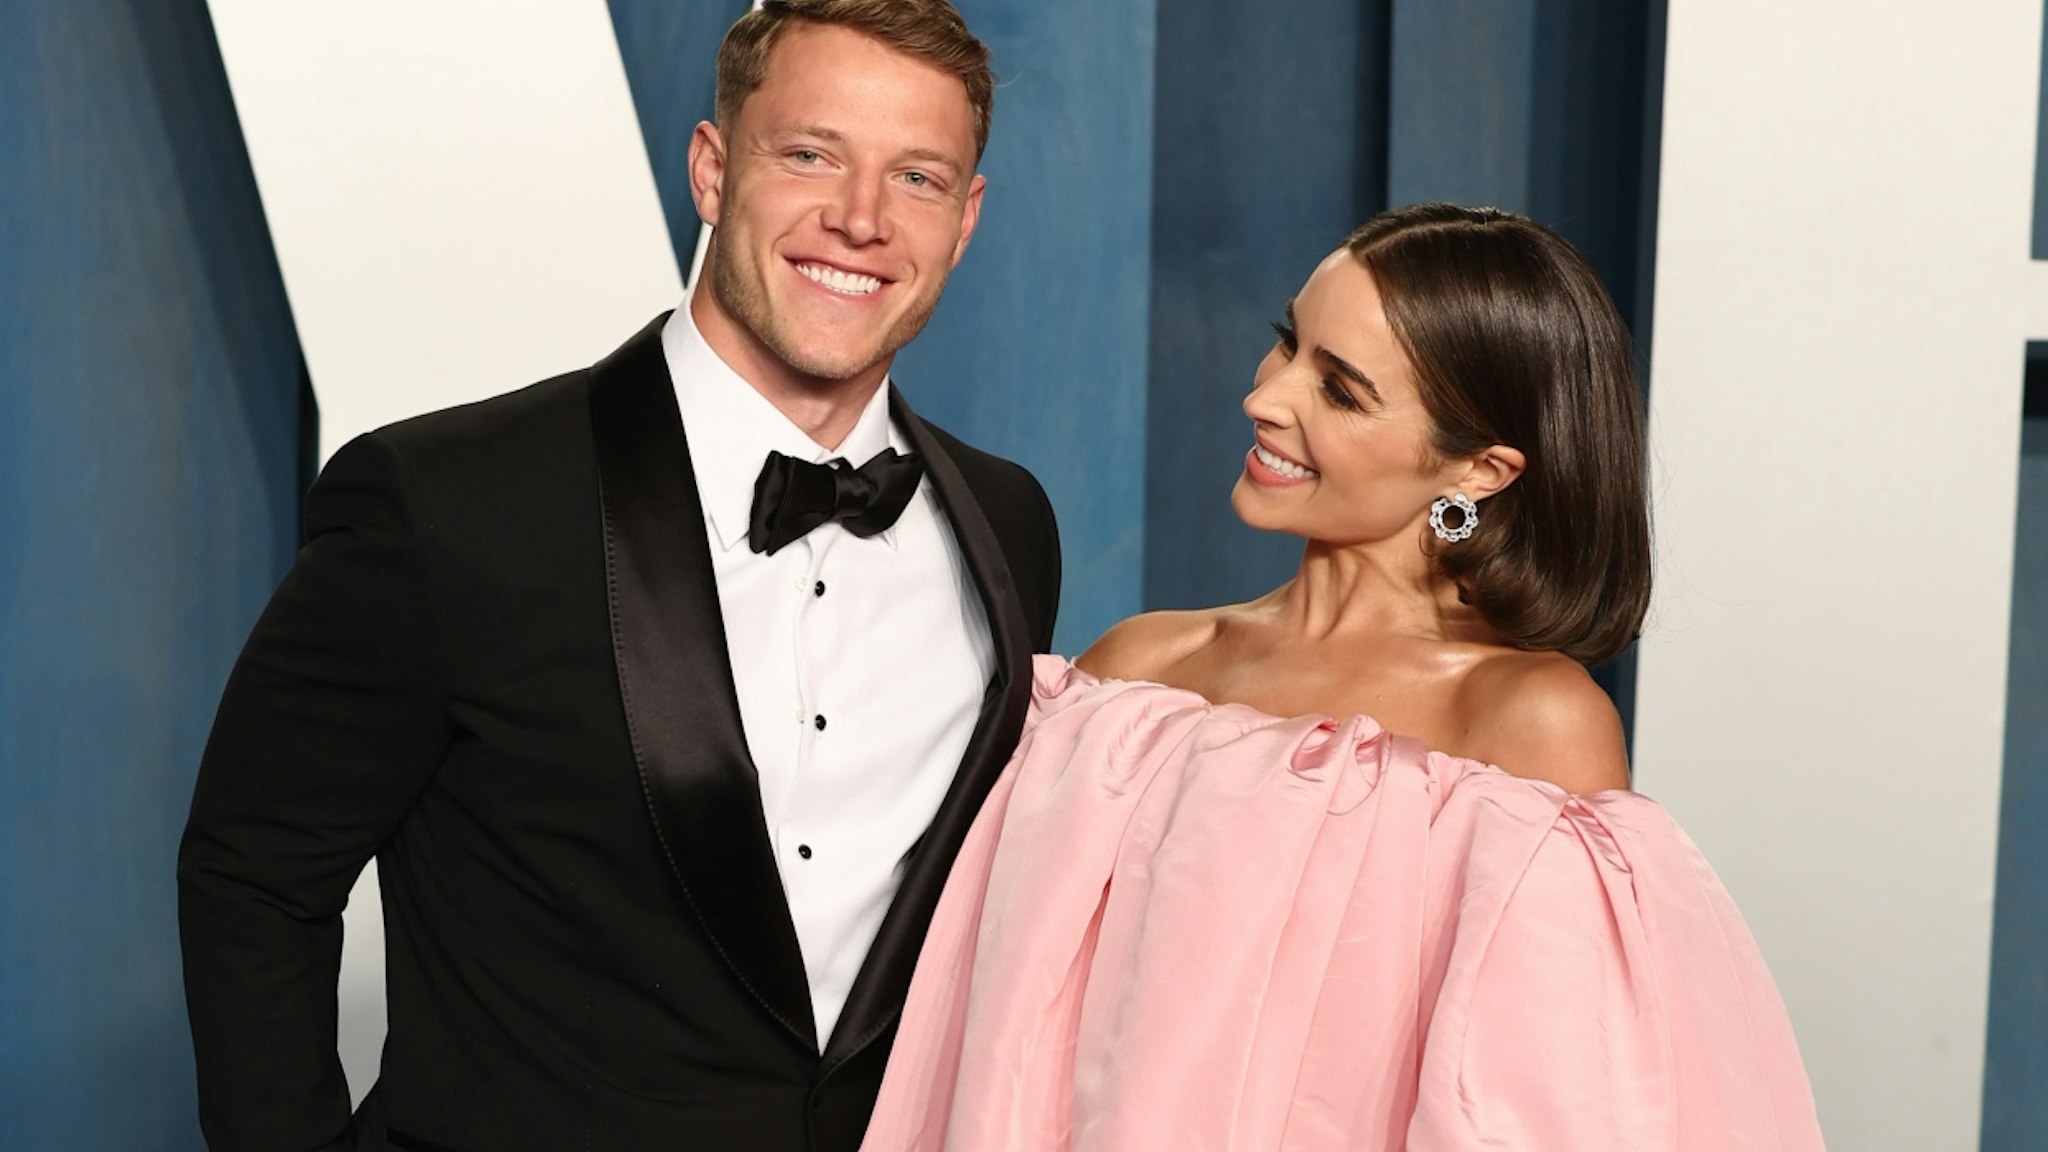 Christian McCaffrey and Olivia Culpo attend the 2022 Vanity Fair Oscar Party hosted by Radhika Jones at Wallis Annenberg Center for the Performing Arts on March 27, 2022 in Beverly Hills, California.